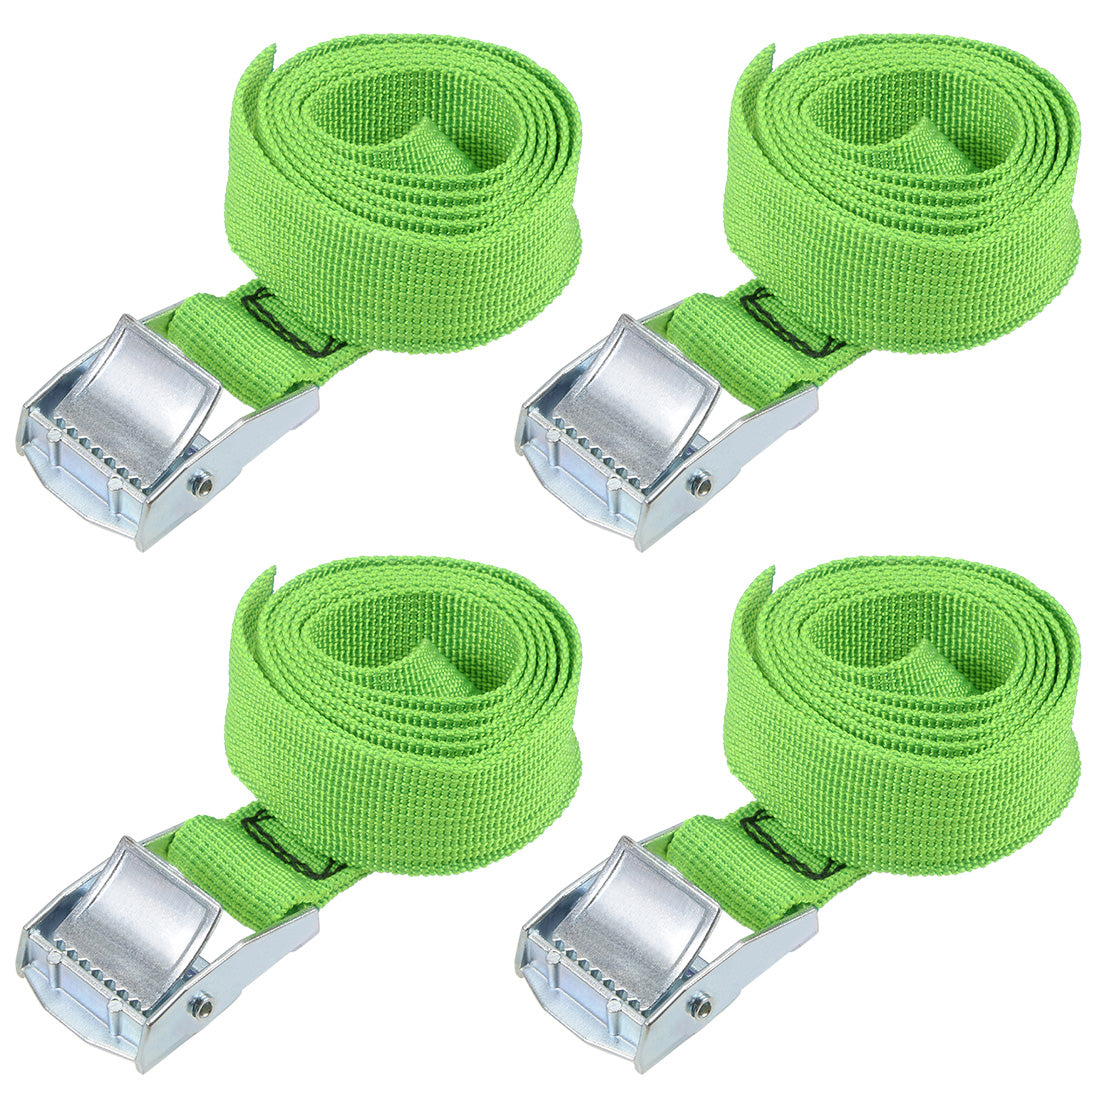 uxcell Uxcell Lashing Strap 1" x 3.3' Cargo Tie Down Straps with Cam Lock Buckle Up to 551lbs Green 4pcs